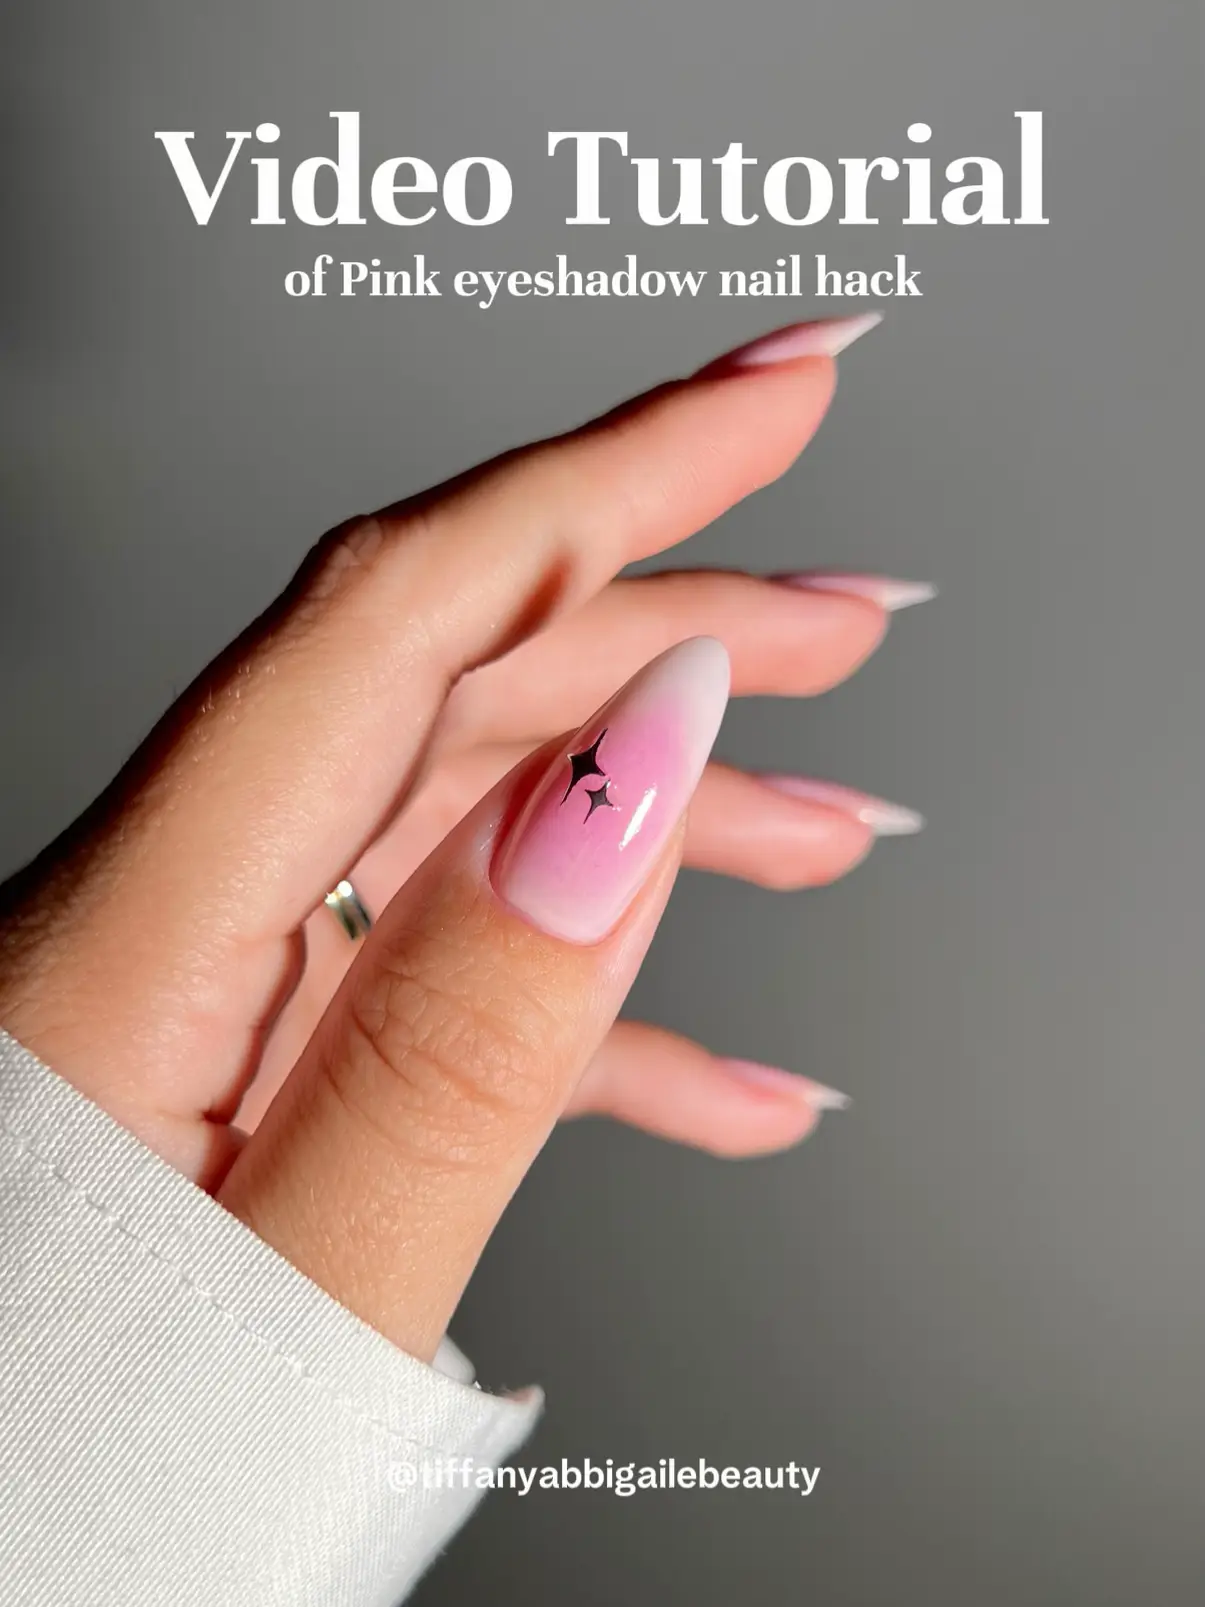 People love this eyeshadow hack for airbrush nails – but does it actually  work?